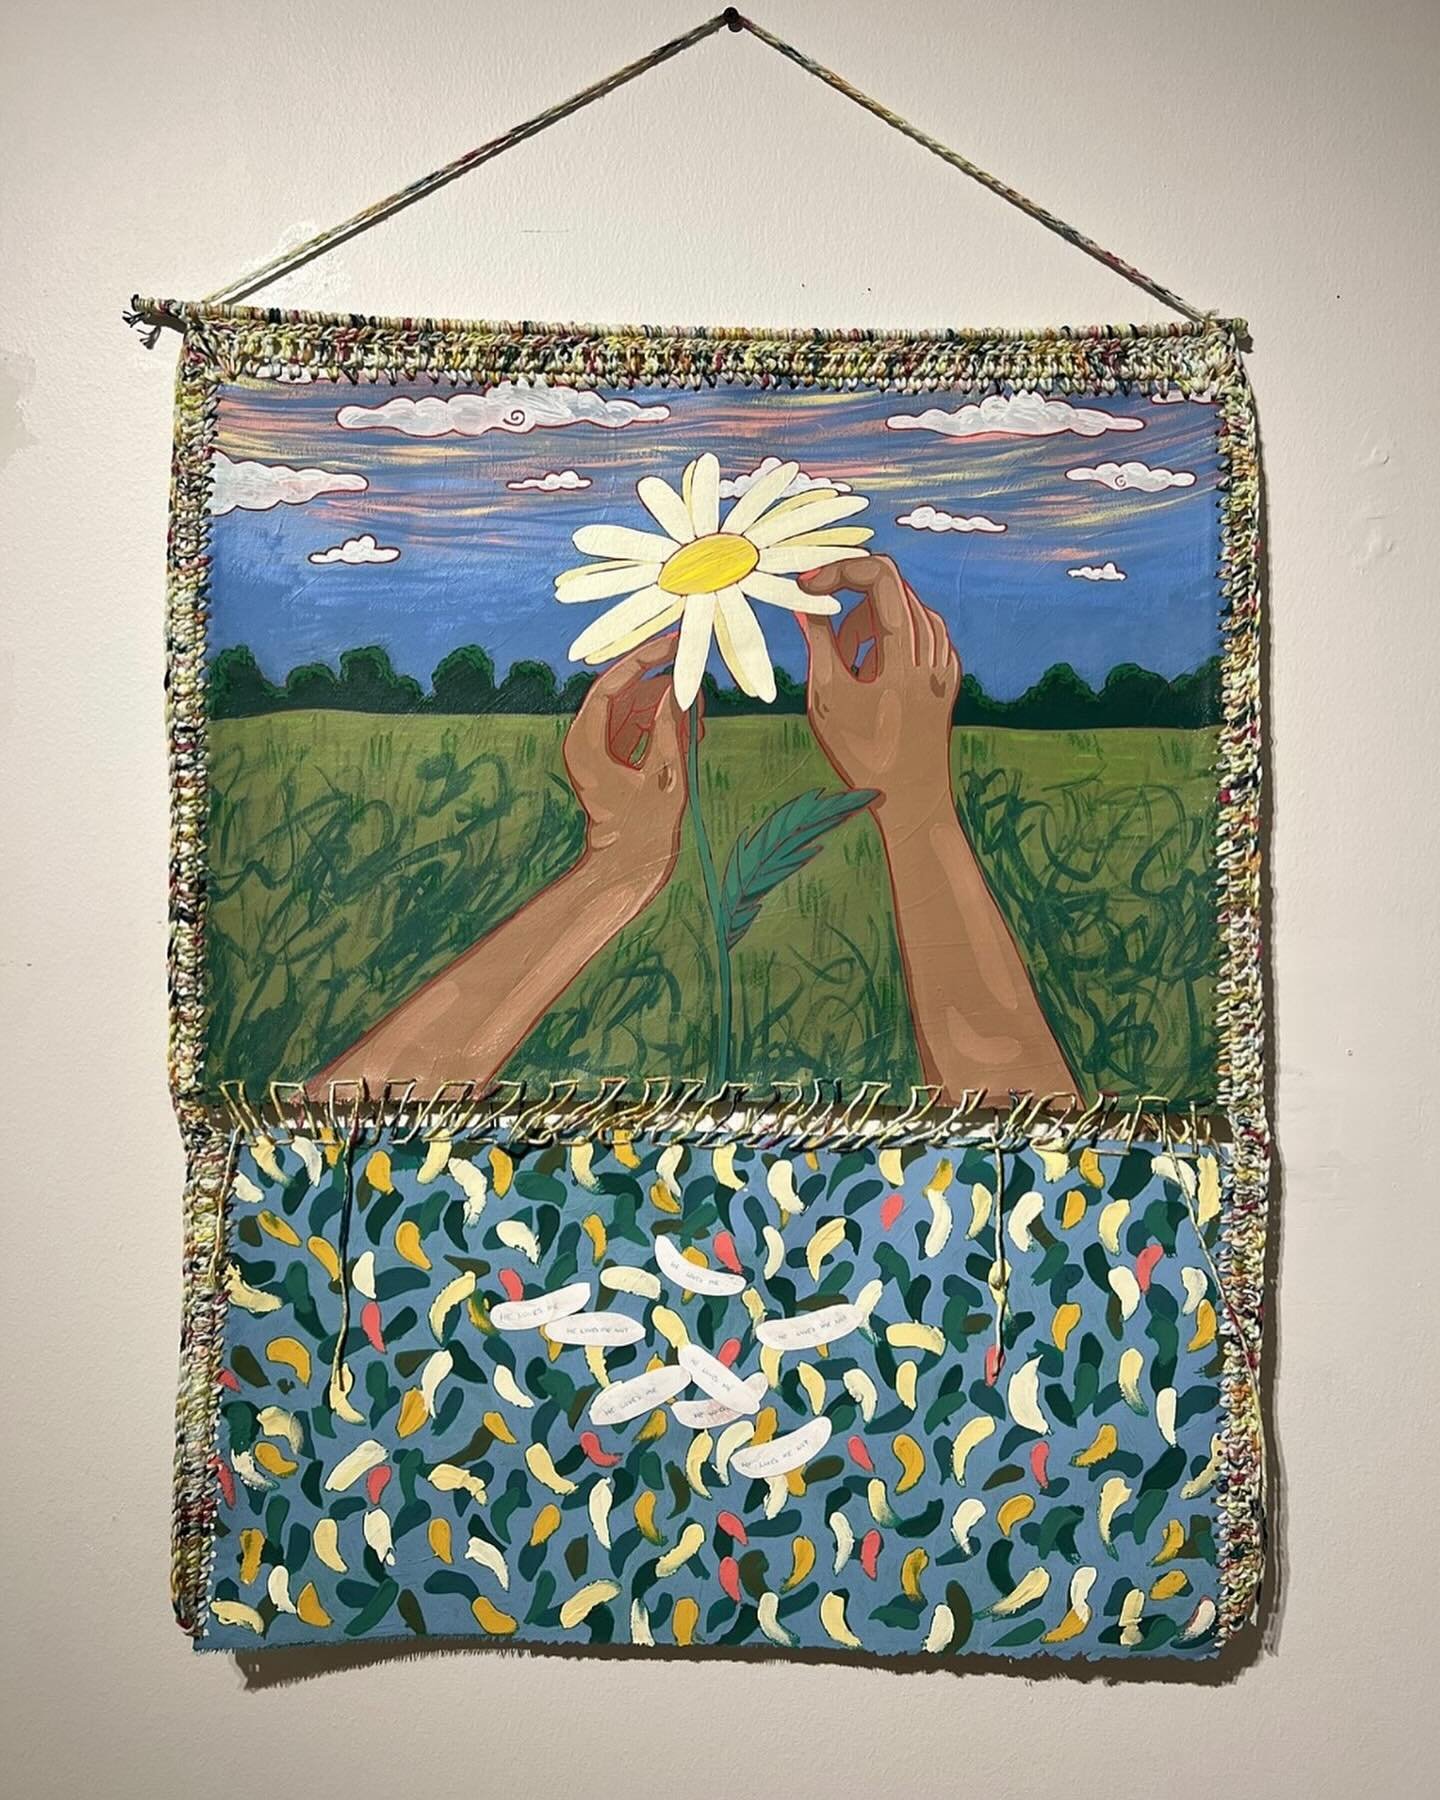 Spotlight on some of the beautiful works in our Women in Art | A Joyful Journey Exhibit.  Lauren Careese Alexander
&ldquo;The flowers would never lie to me&rdquo; - acrylic and yarn on canvas, 25x20in.
I think that one of the silliest and most precio